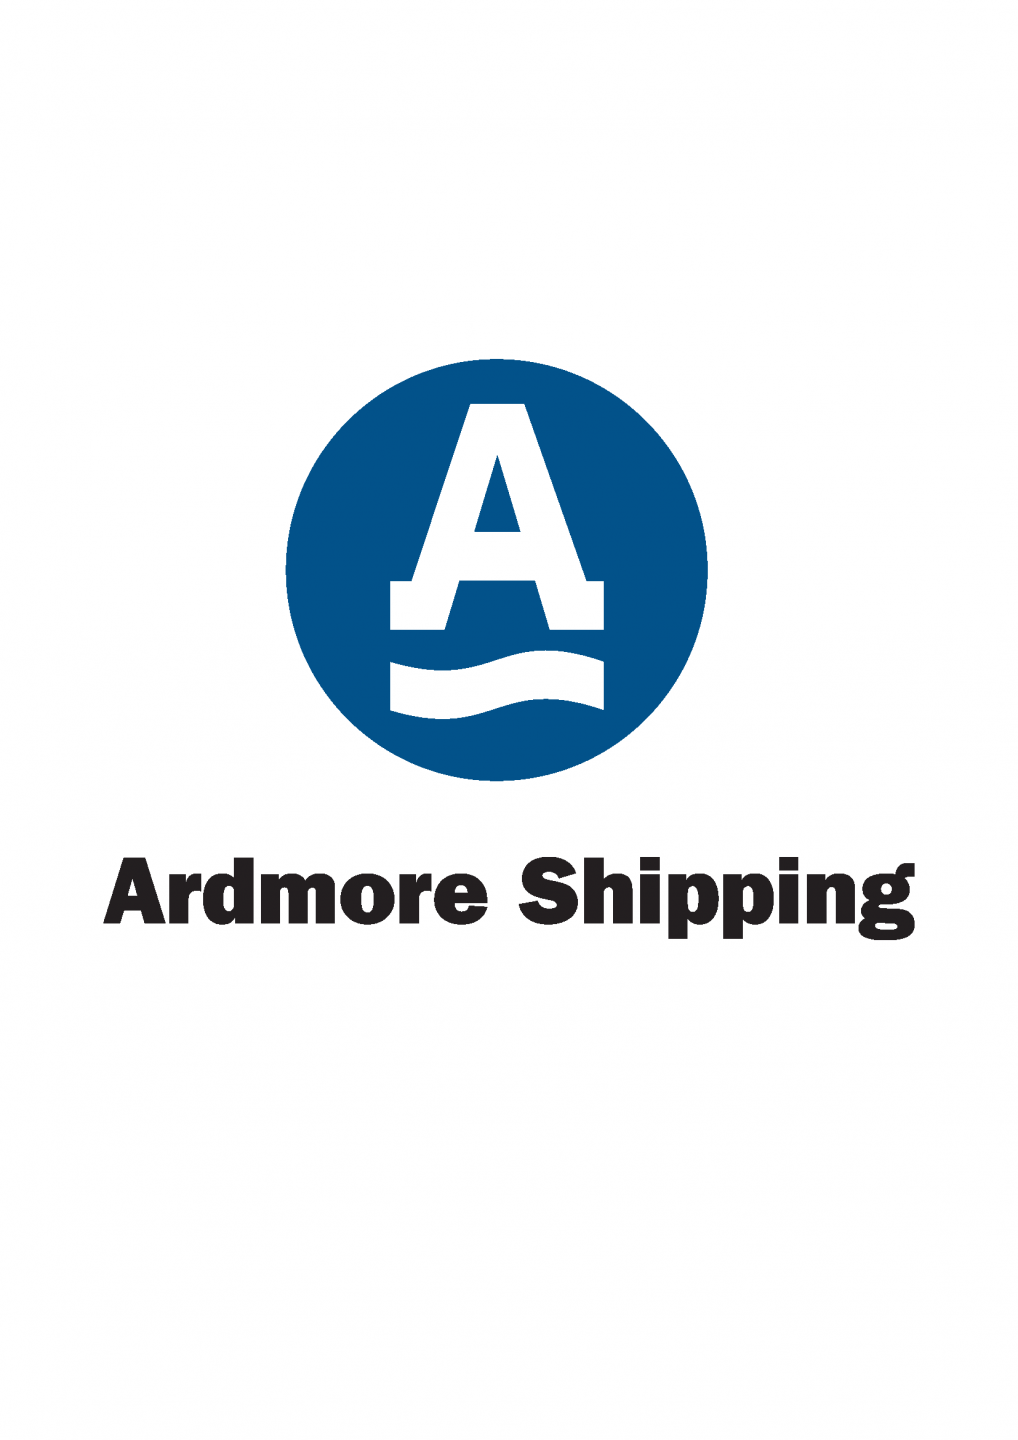 Ardmore Shipping